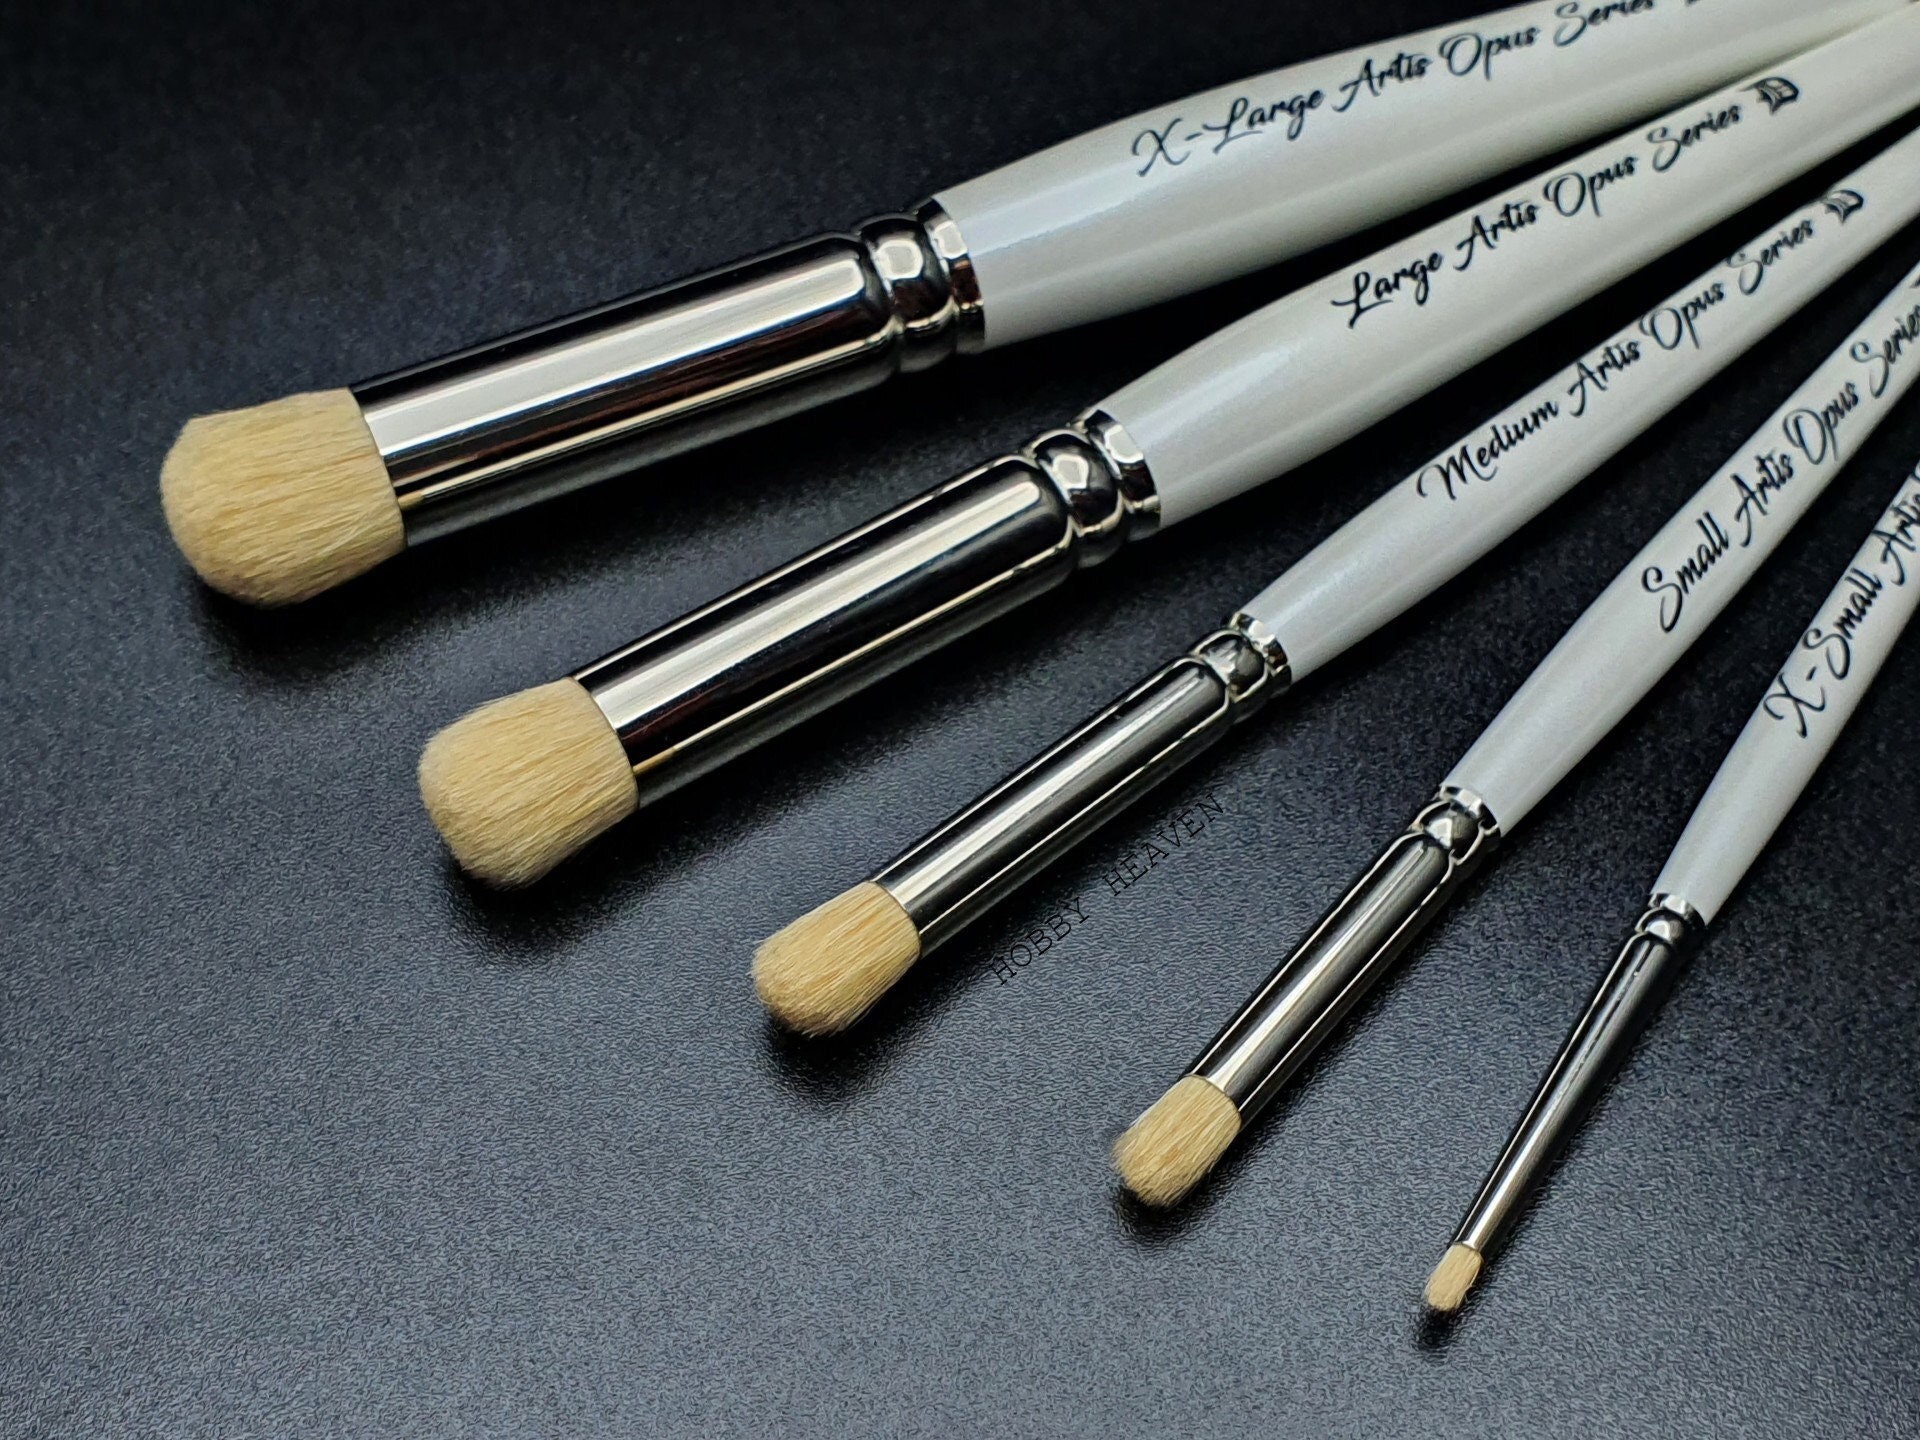 Artis Opus - Series D and M Complete 10 Brush Set New